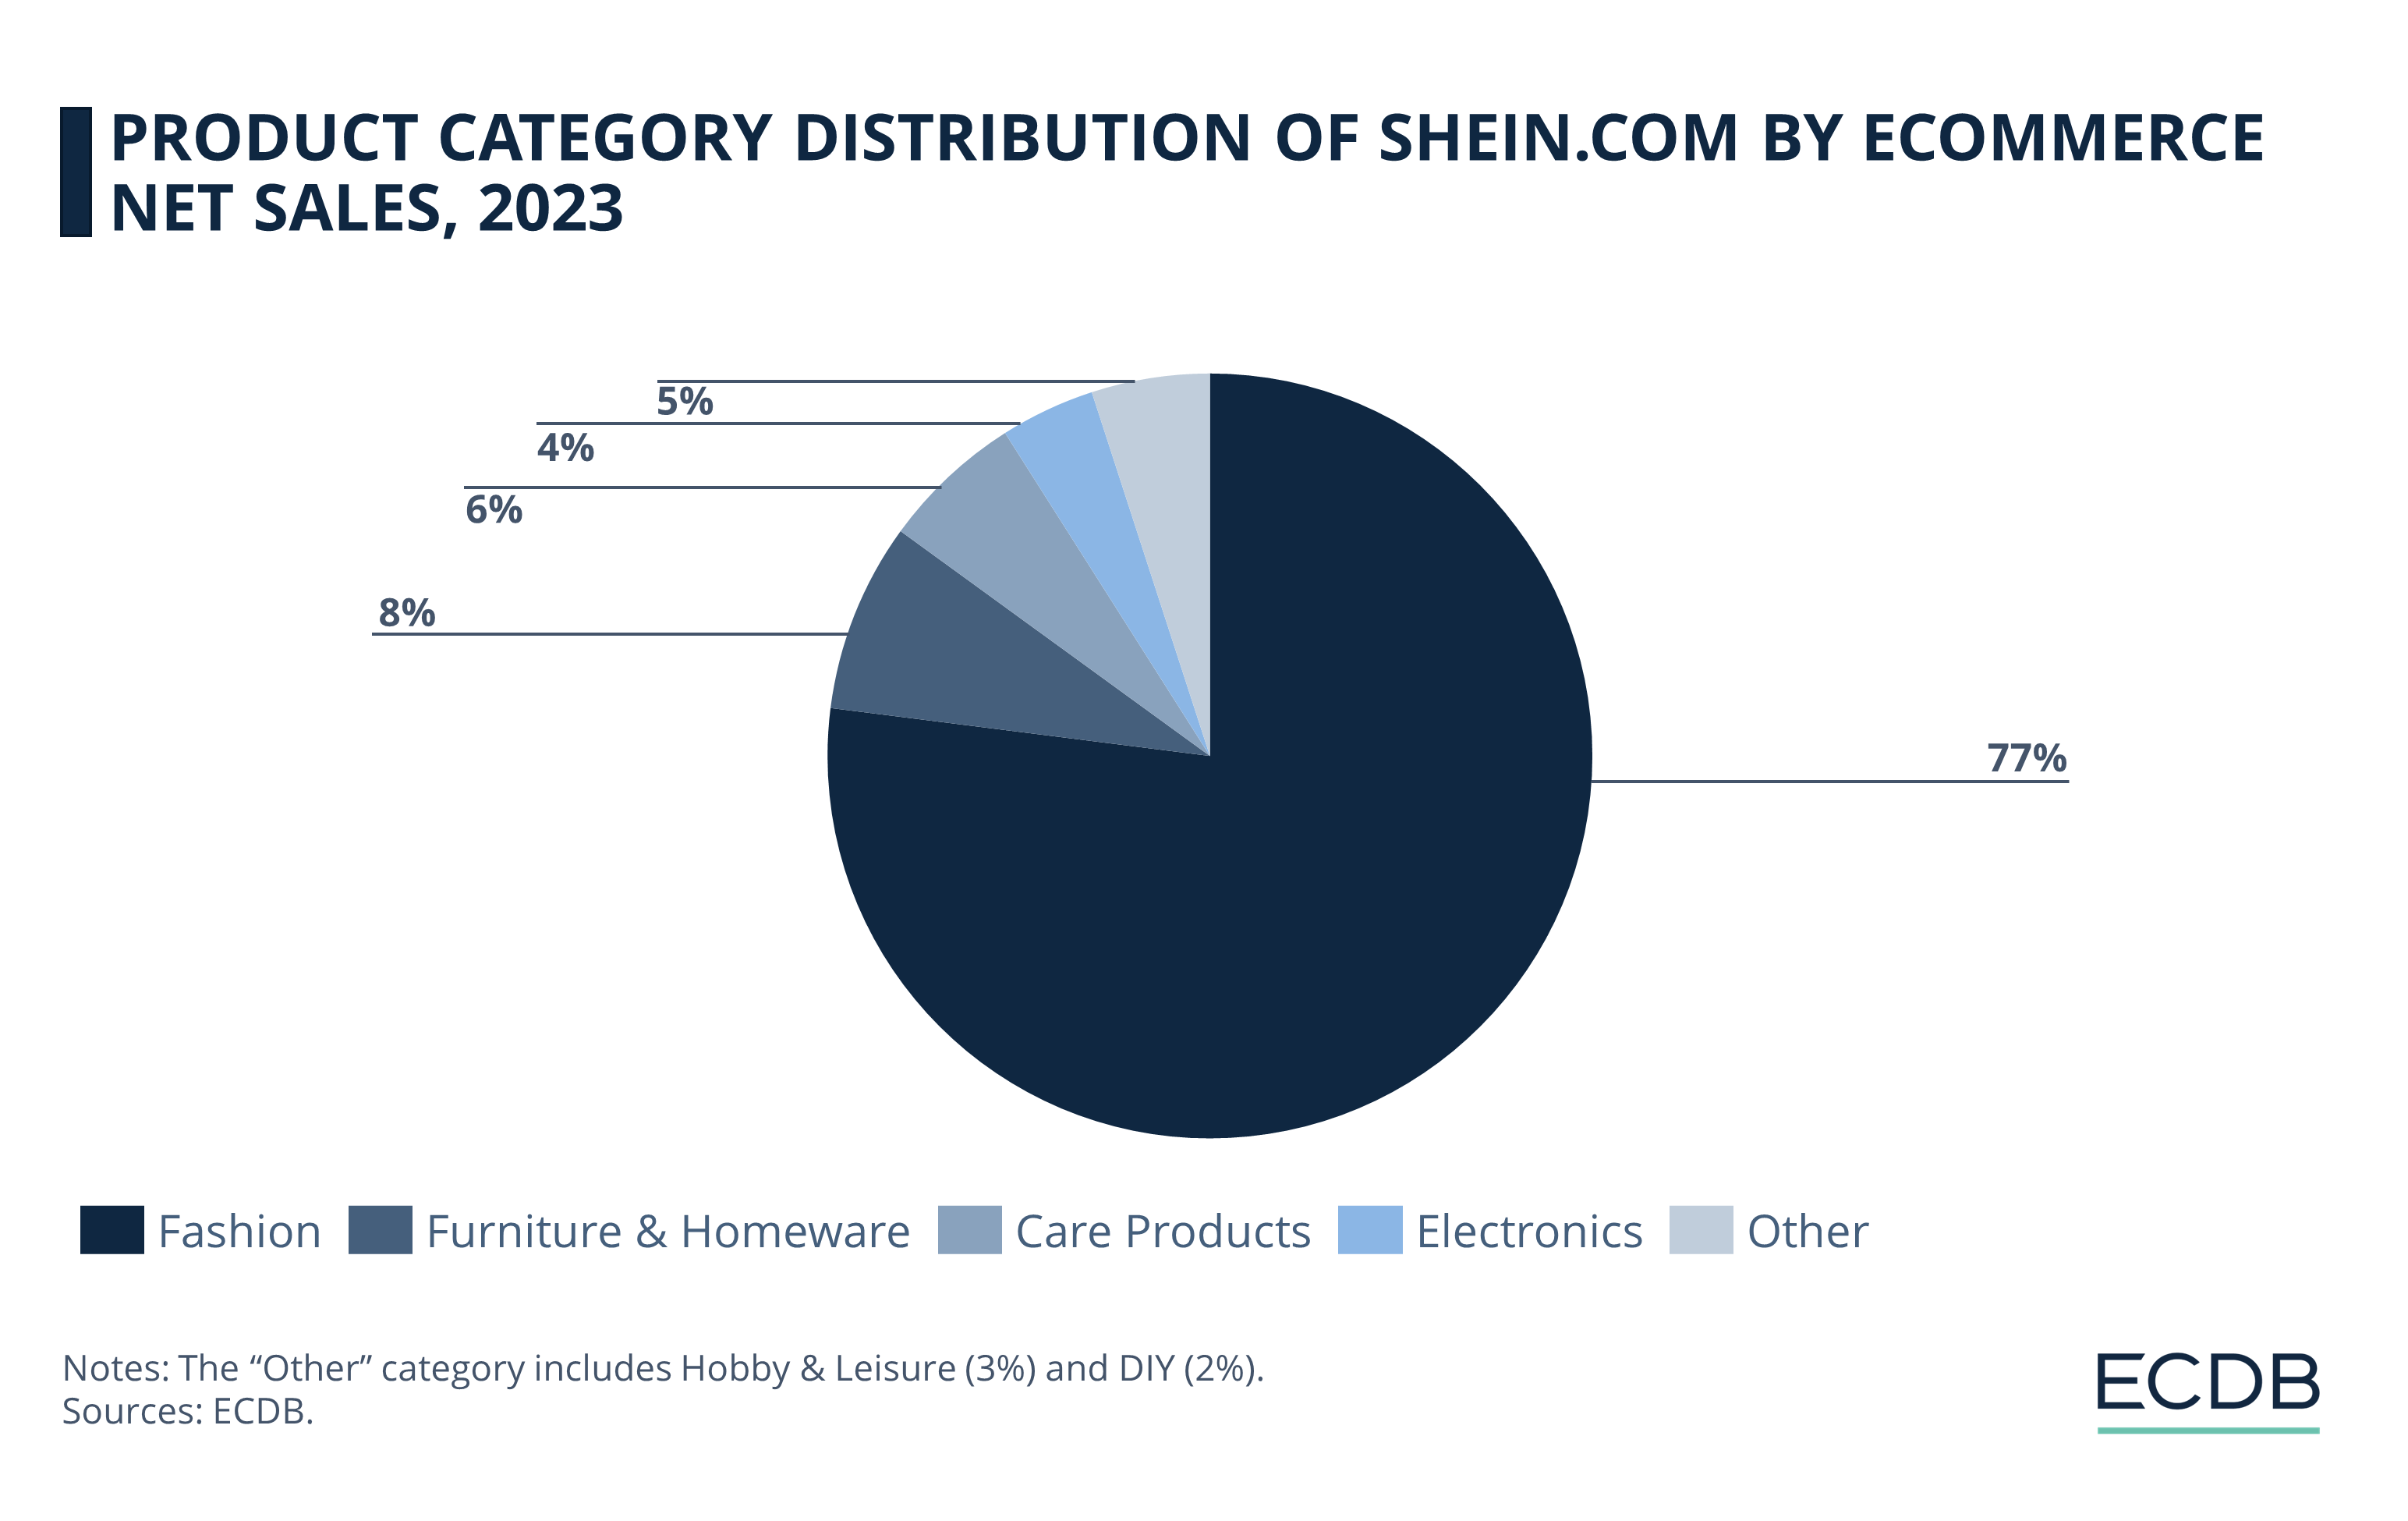 Product Category Distribution of Shein.com by eCommerce Net Sales, 2023